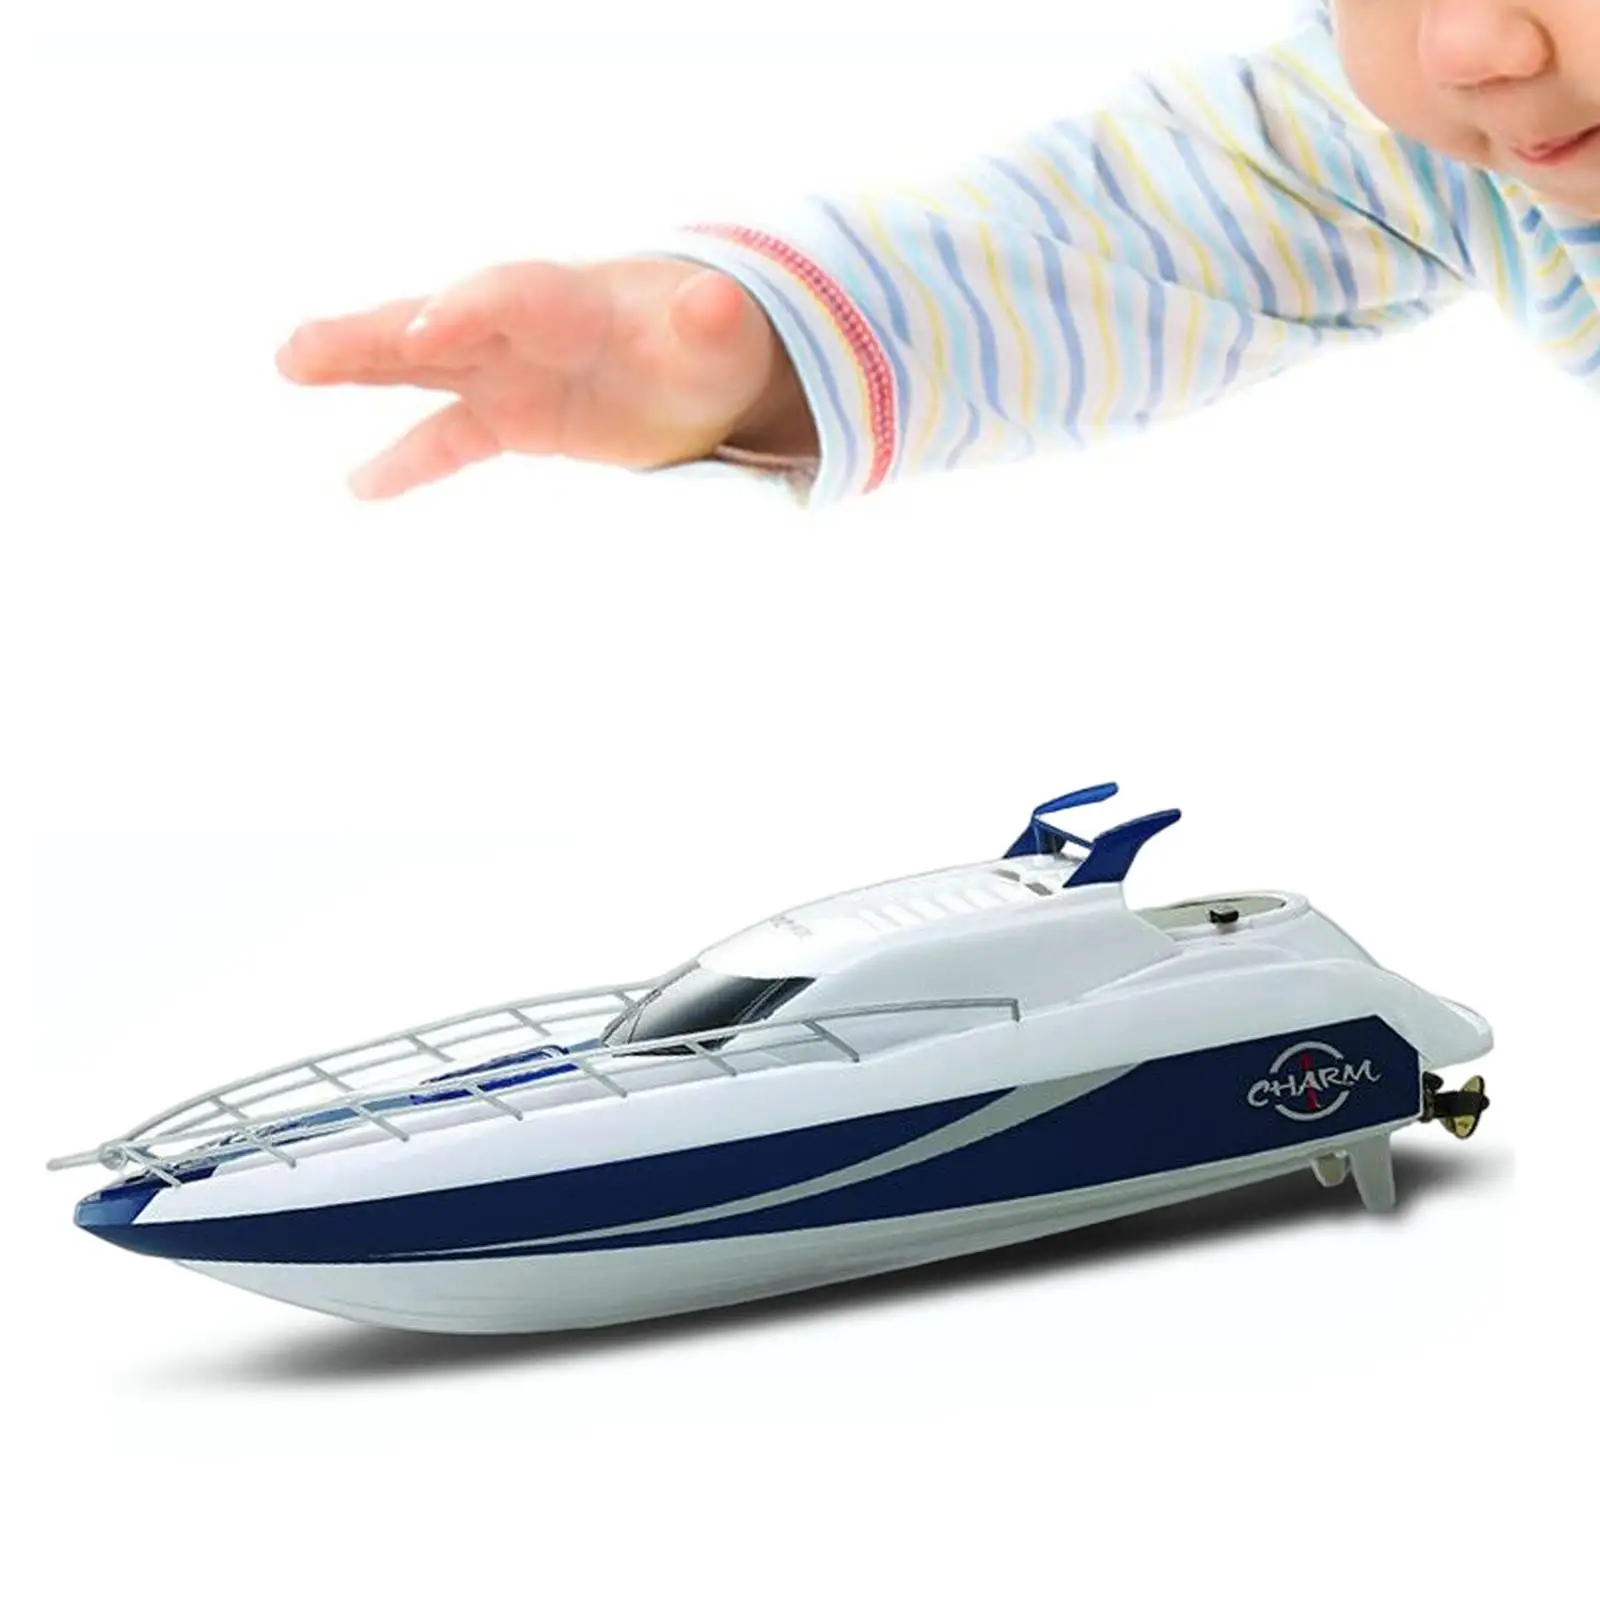 Portable Remote Control Boat Toy Speedboat for Beginner Kids Birthday Gifts